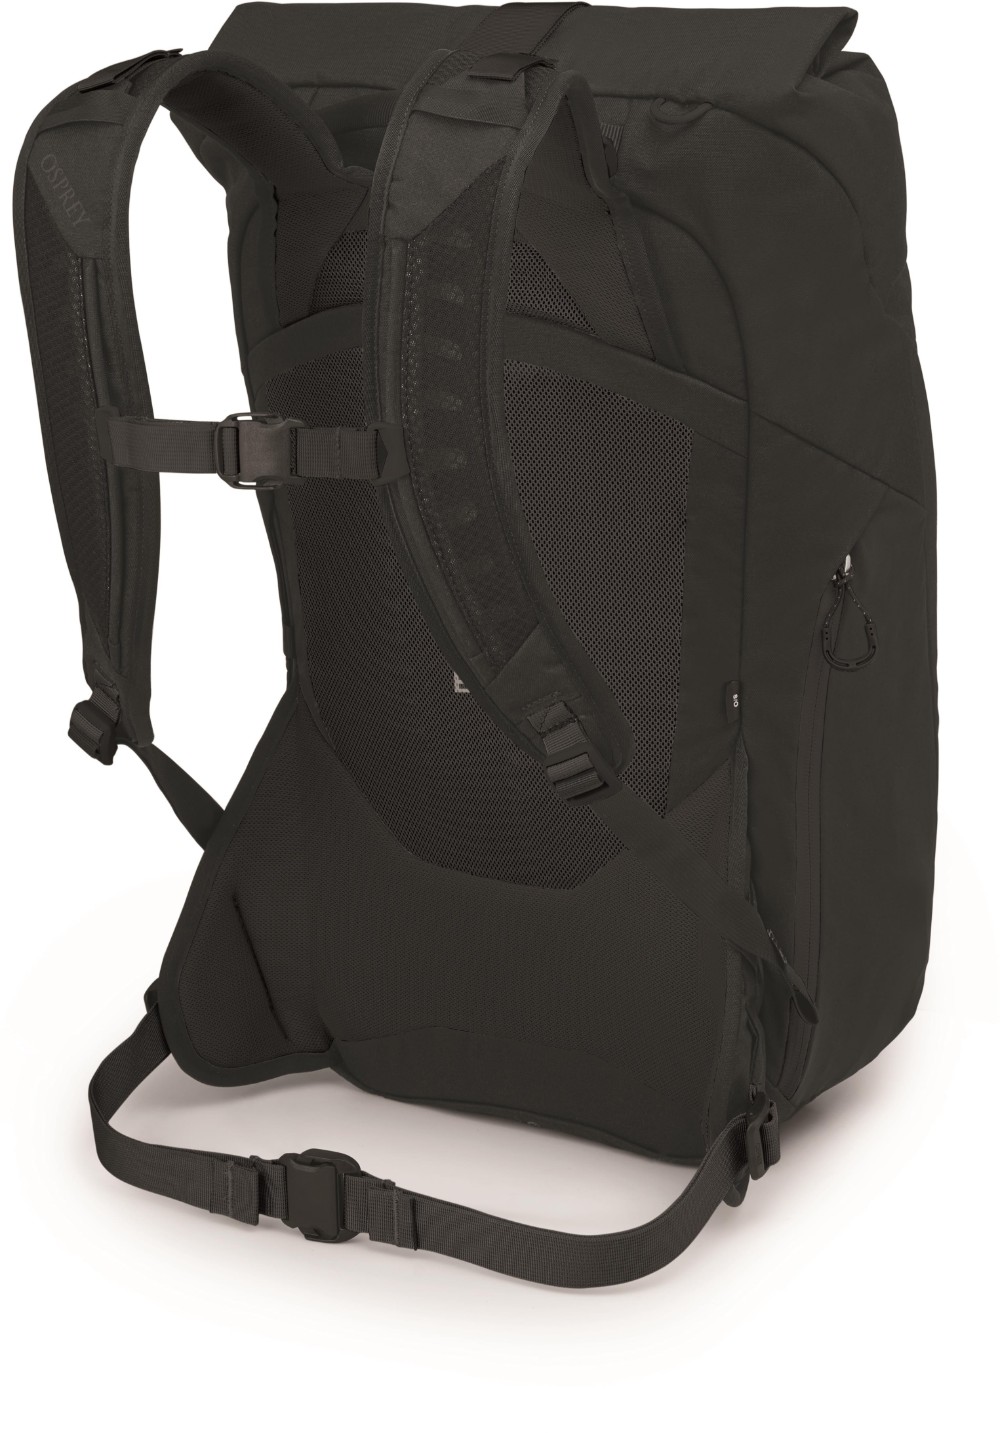 Metron 22 Roll Top Backpack image 1